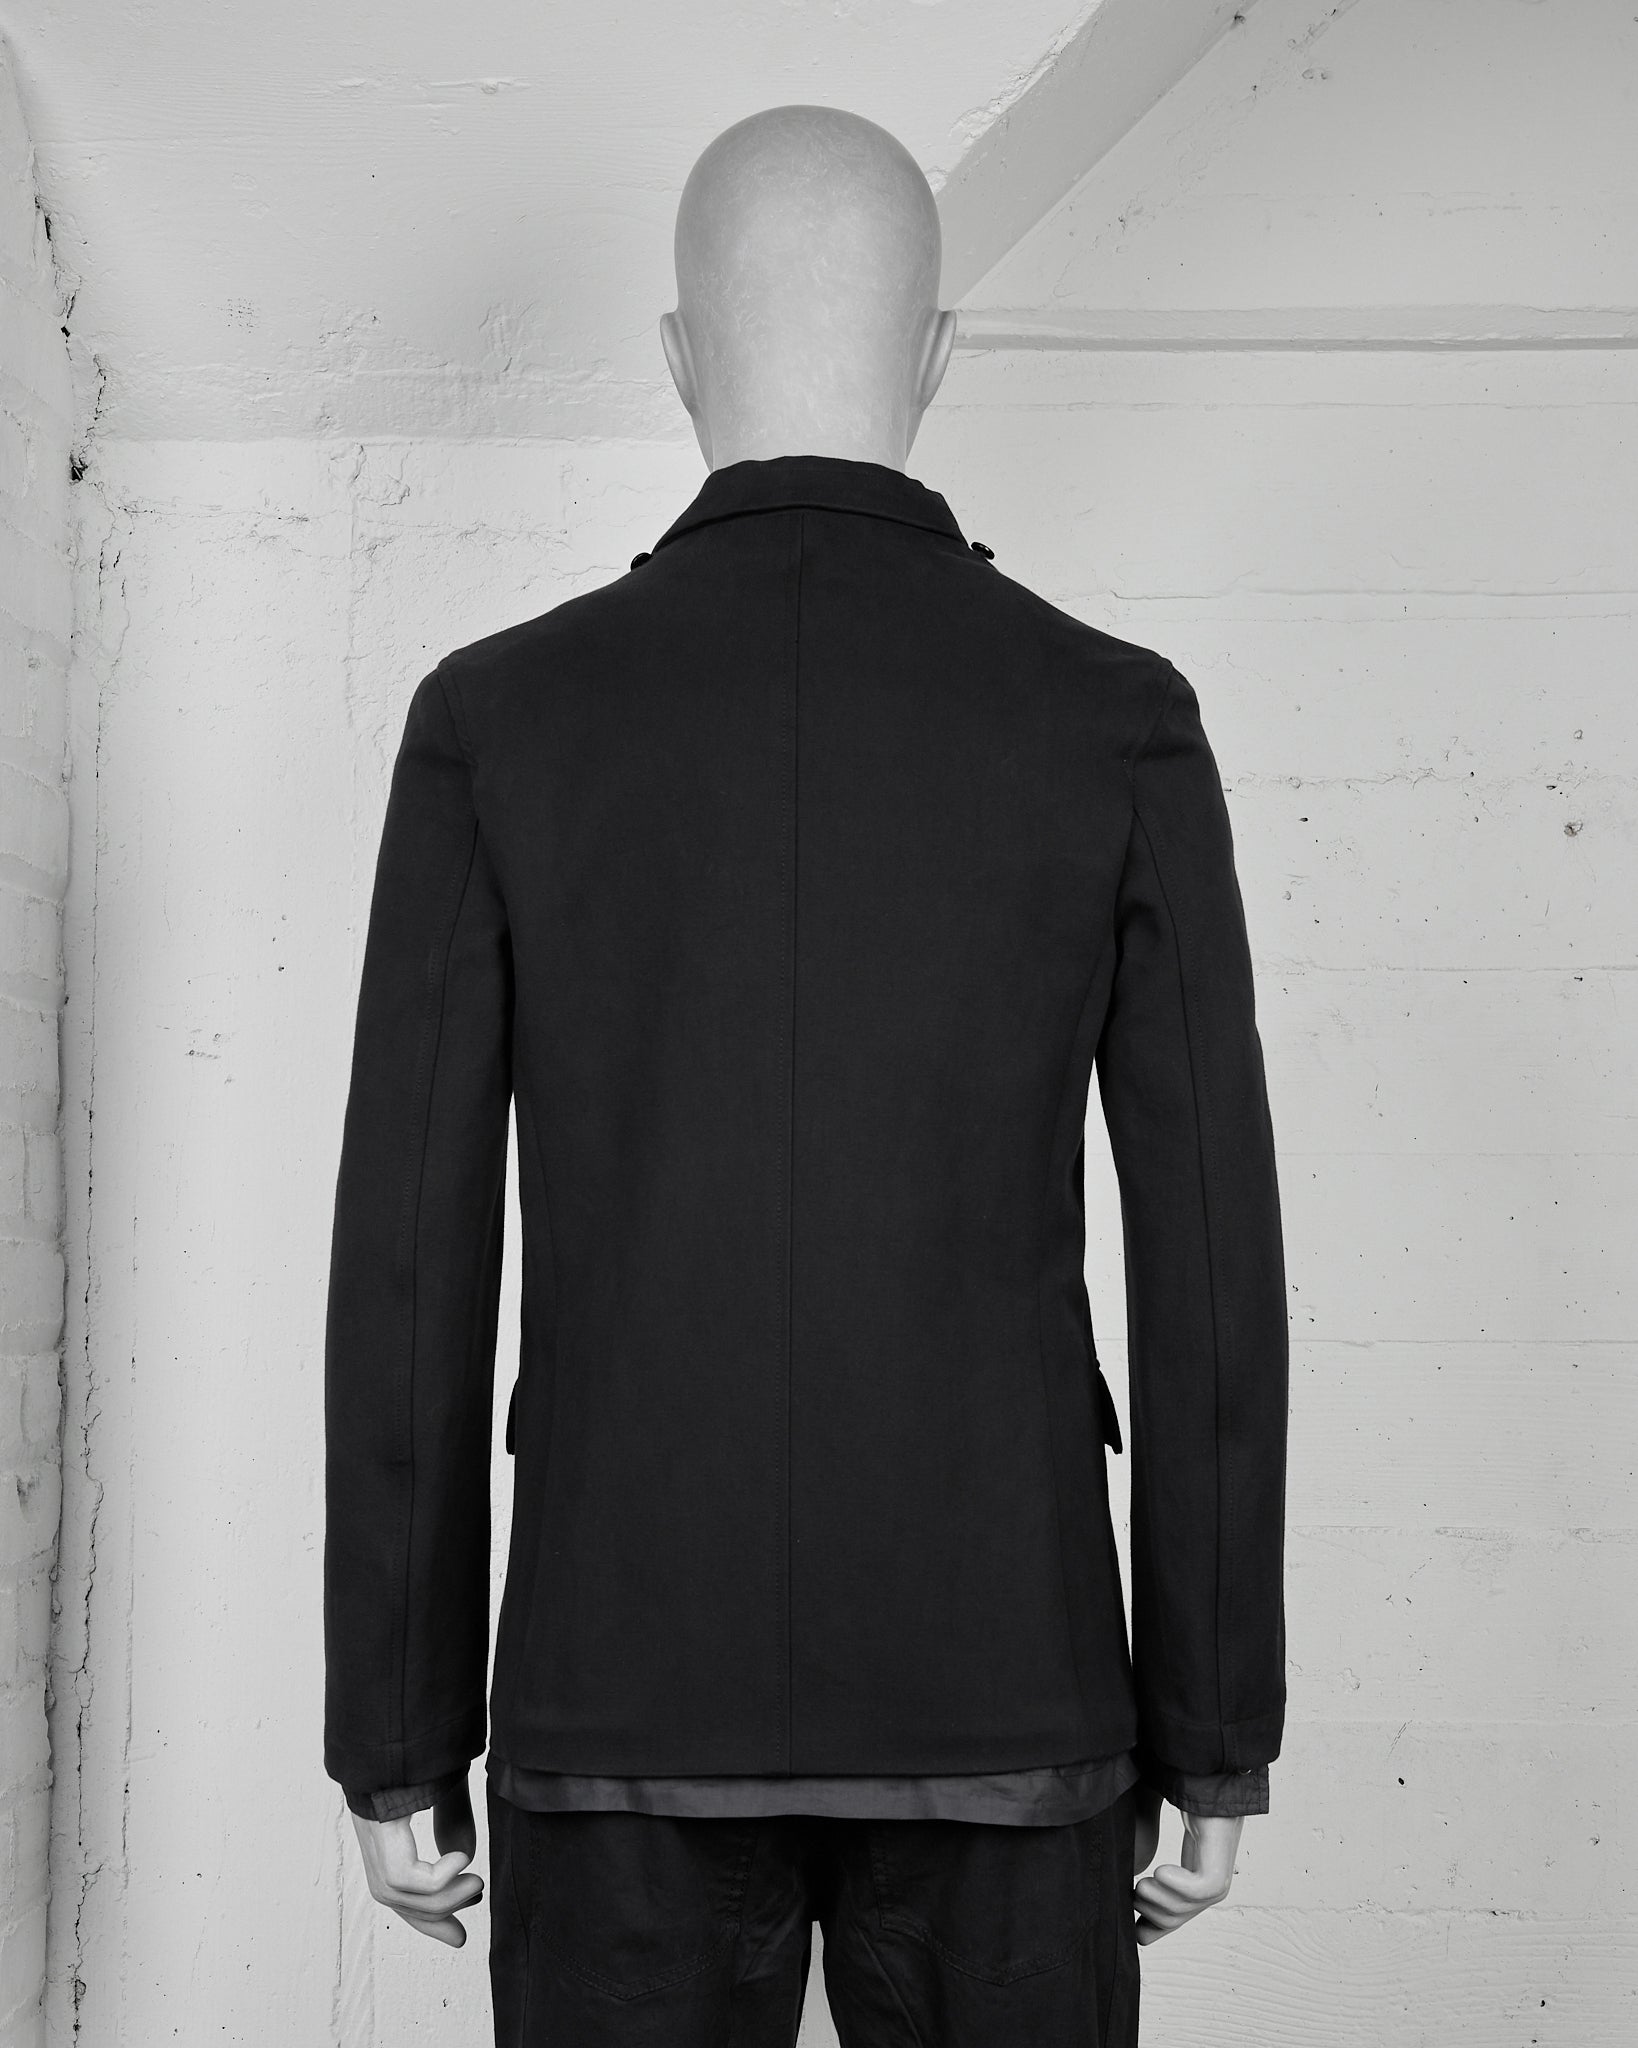 Hussein Chalayan Reversible Jacket - AW05 "In Shadows" back photo